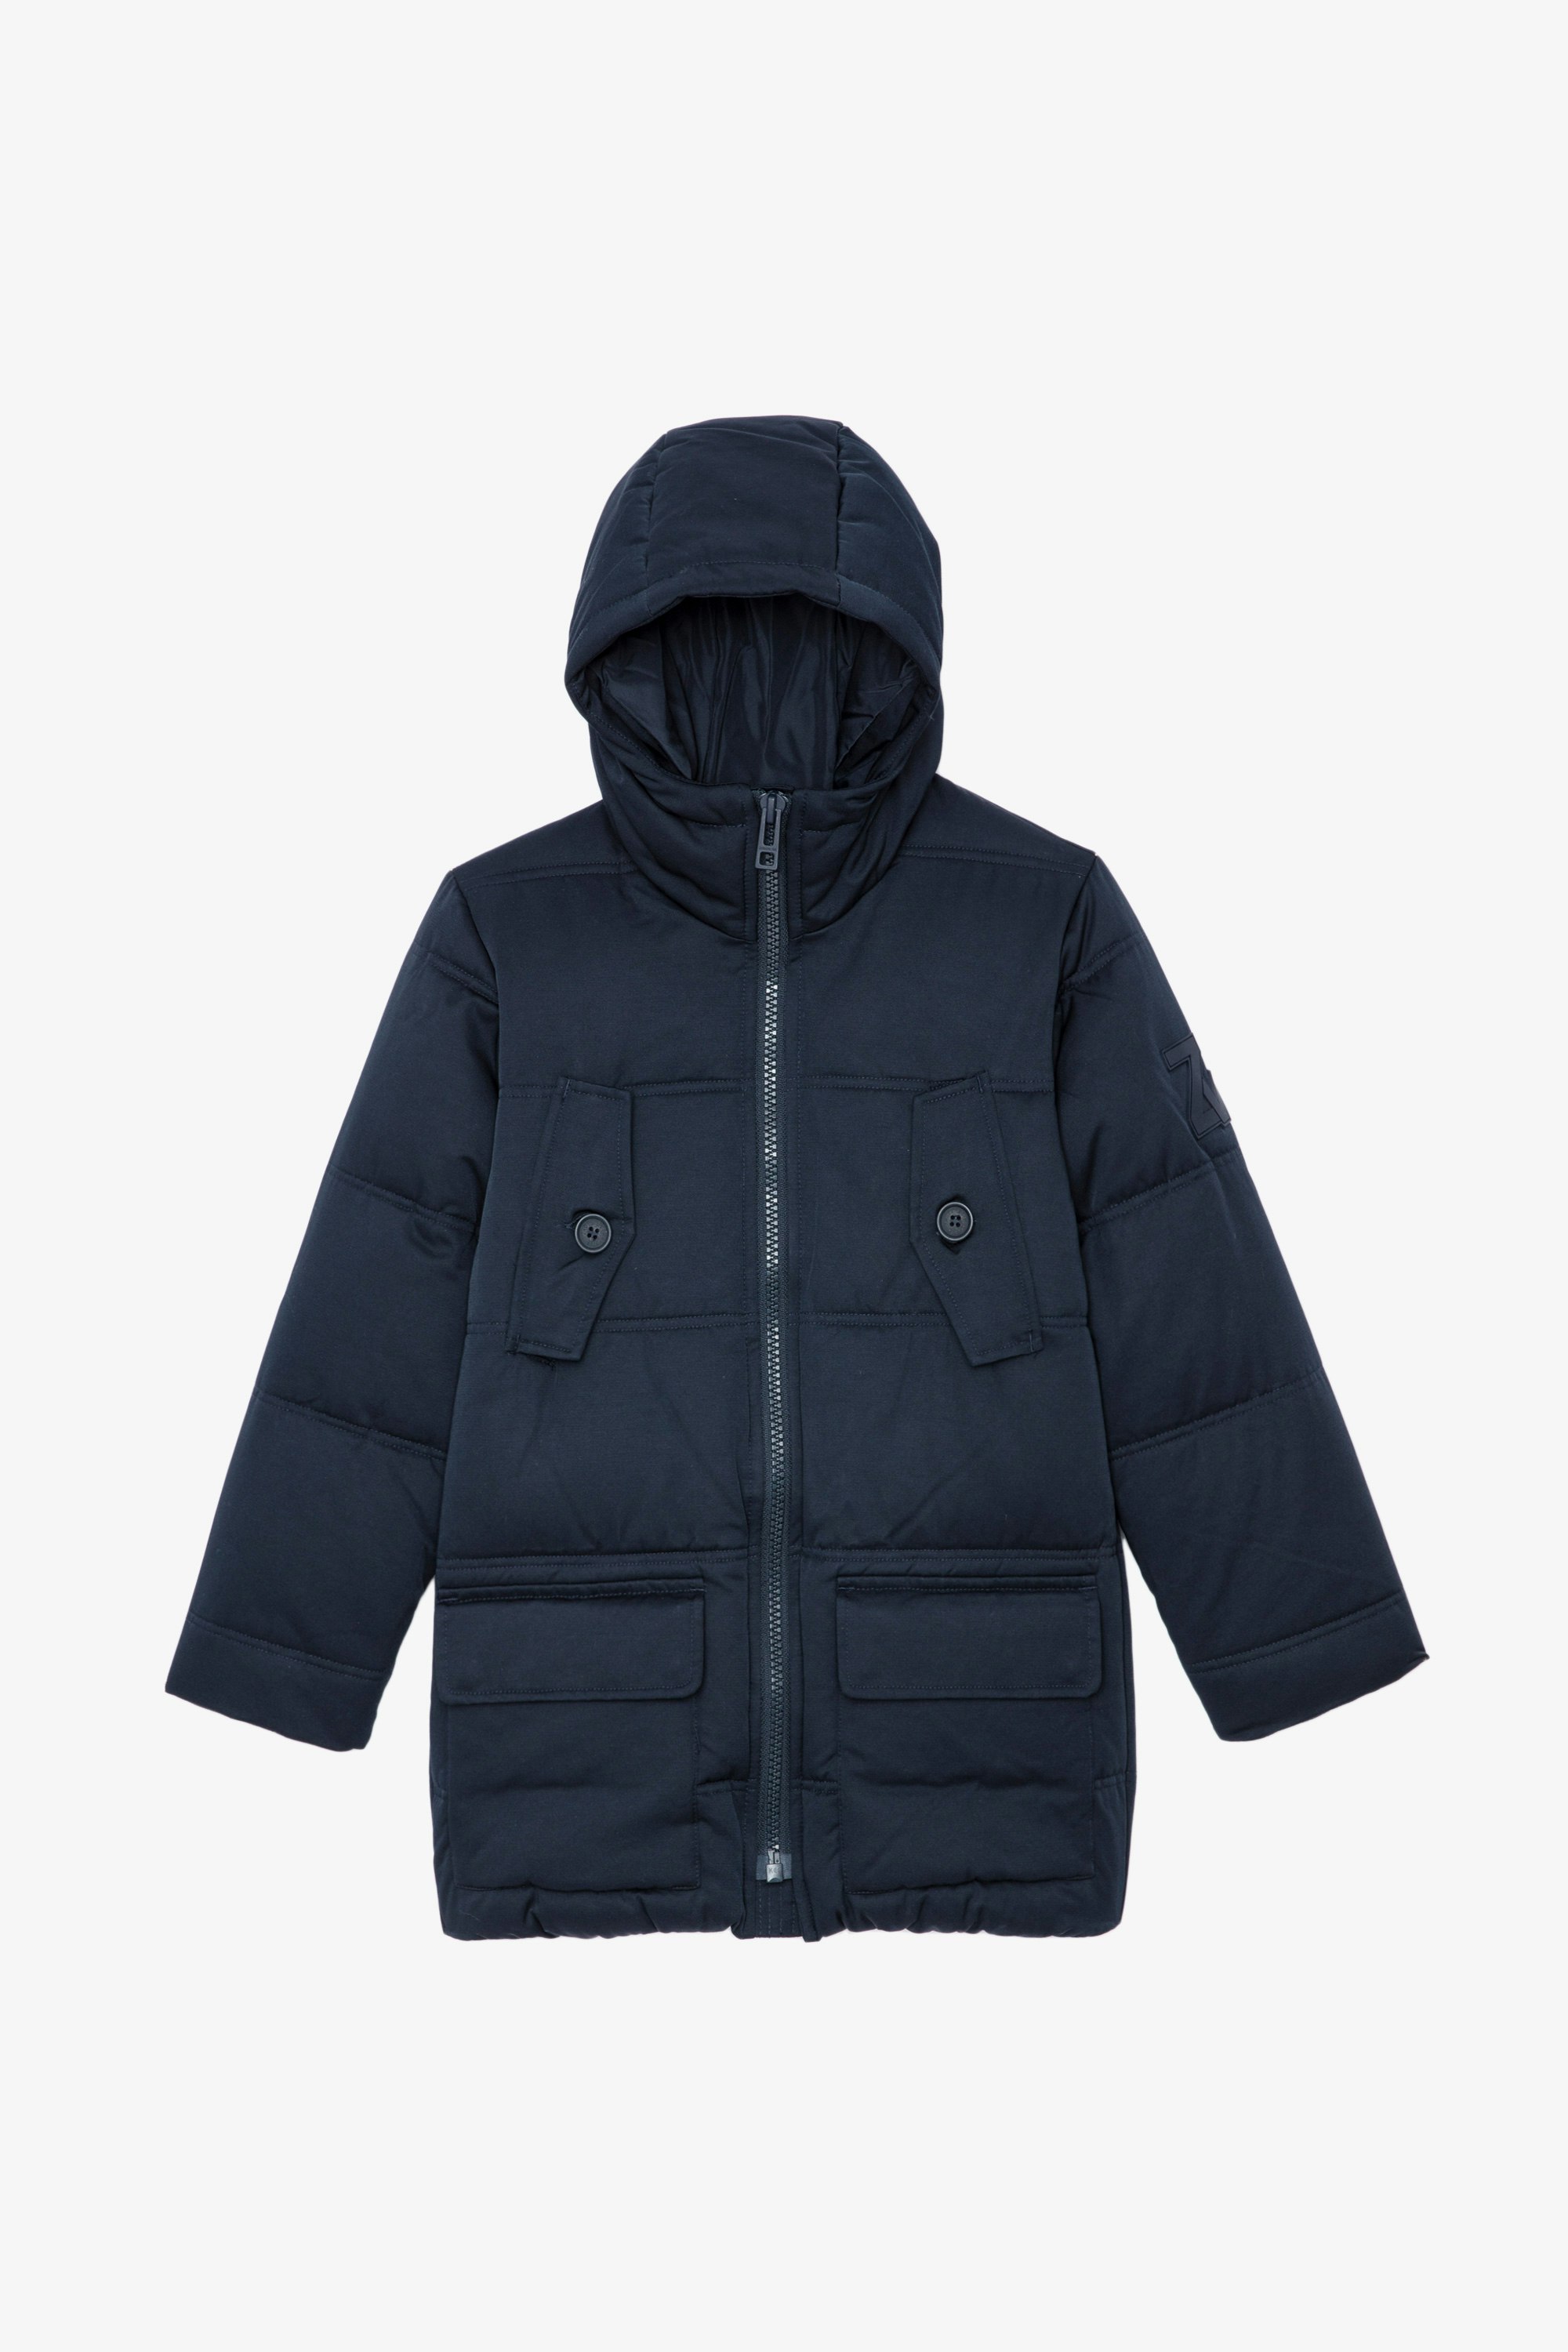 Bow Children’s Puffer Jacket Children’s navy blue and black hooded puffer jacket 